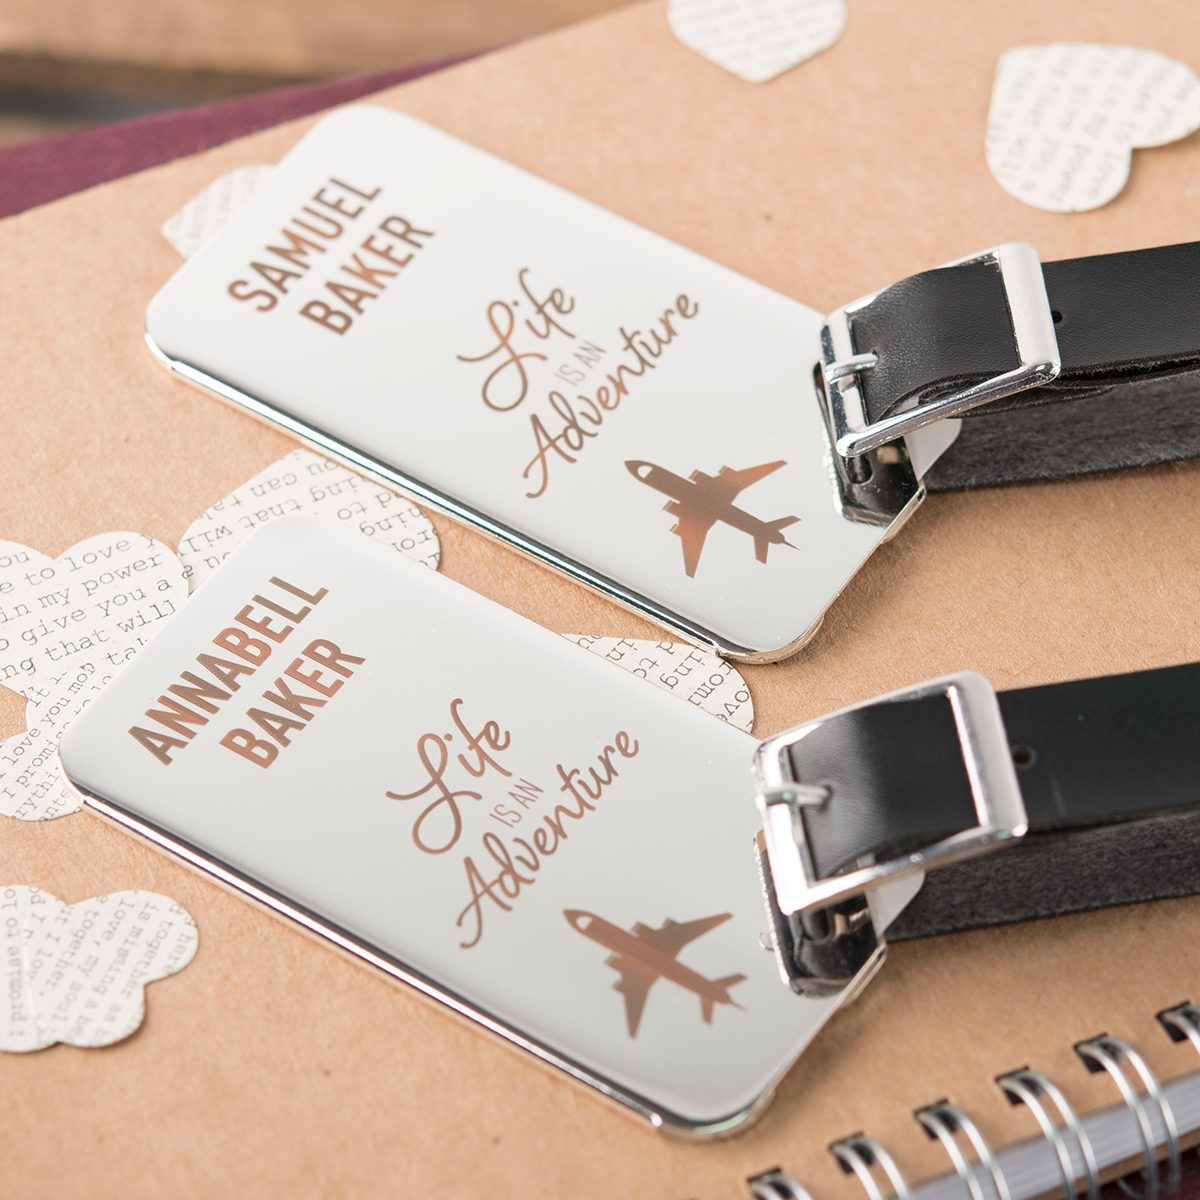 Personalised Stainless Steel Luggage Tags - Life Is An Adventure